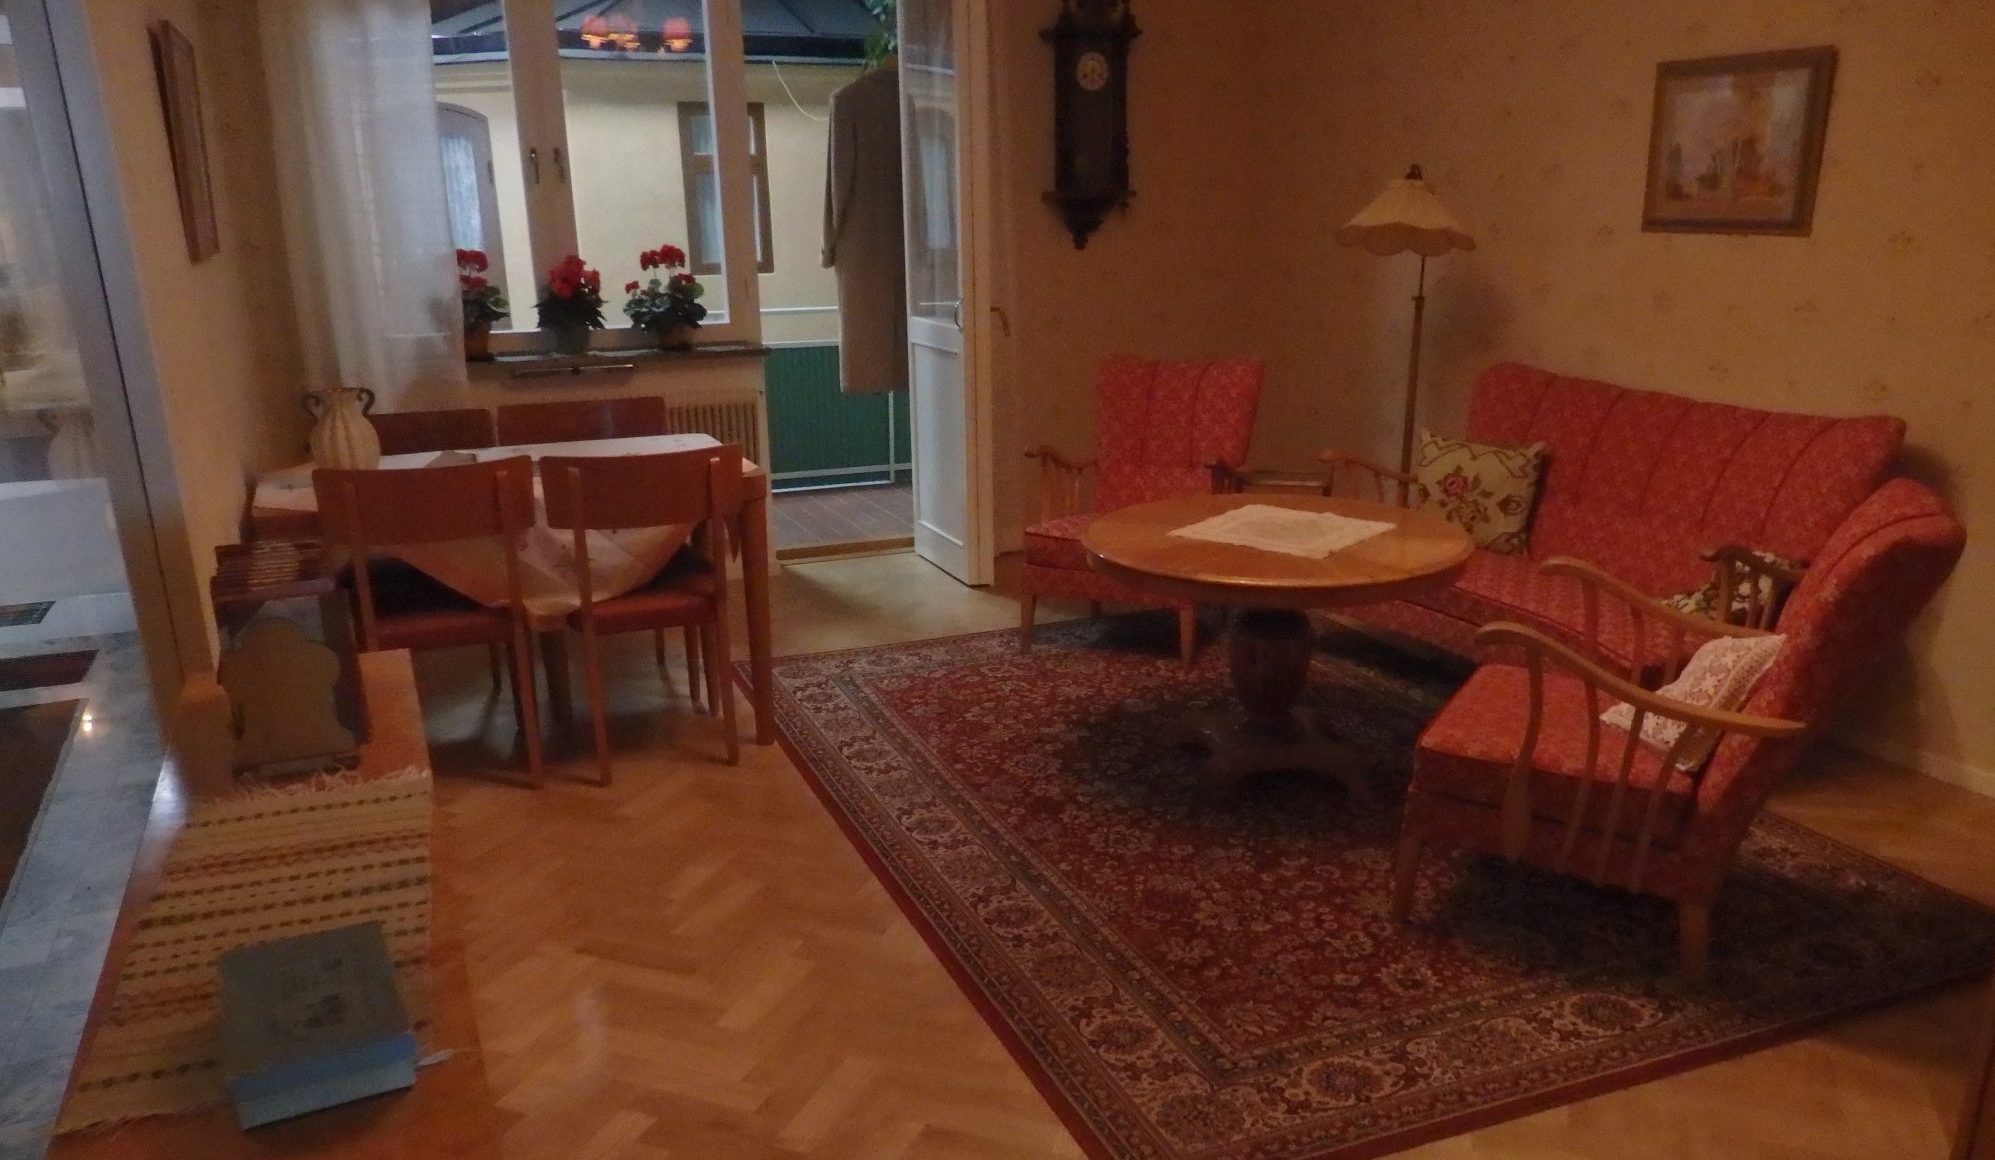 The living room of the recreated Folkhammet apartment in the Nordic Museum, Stockholm, Sweden